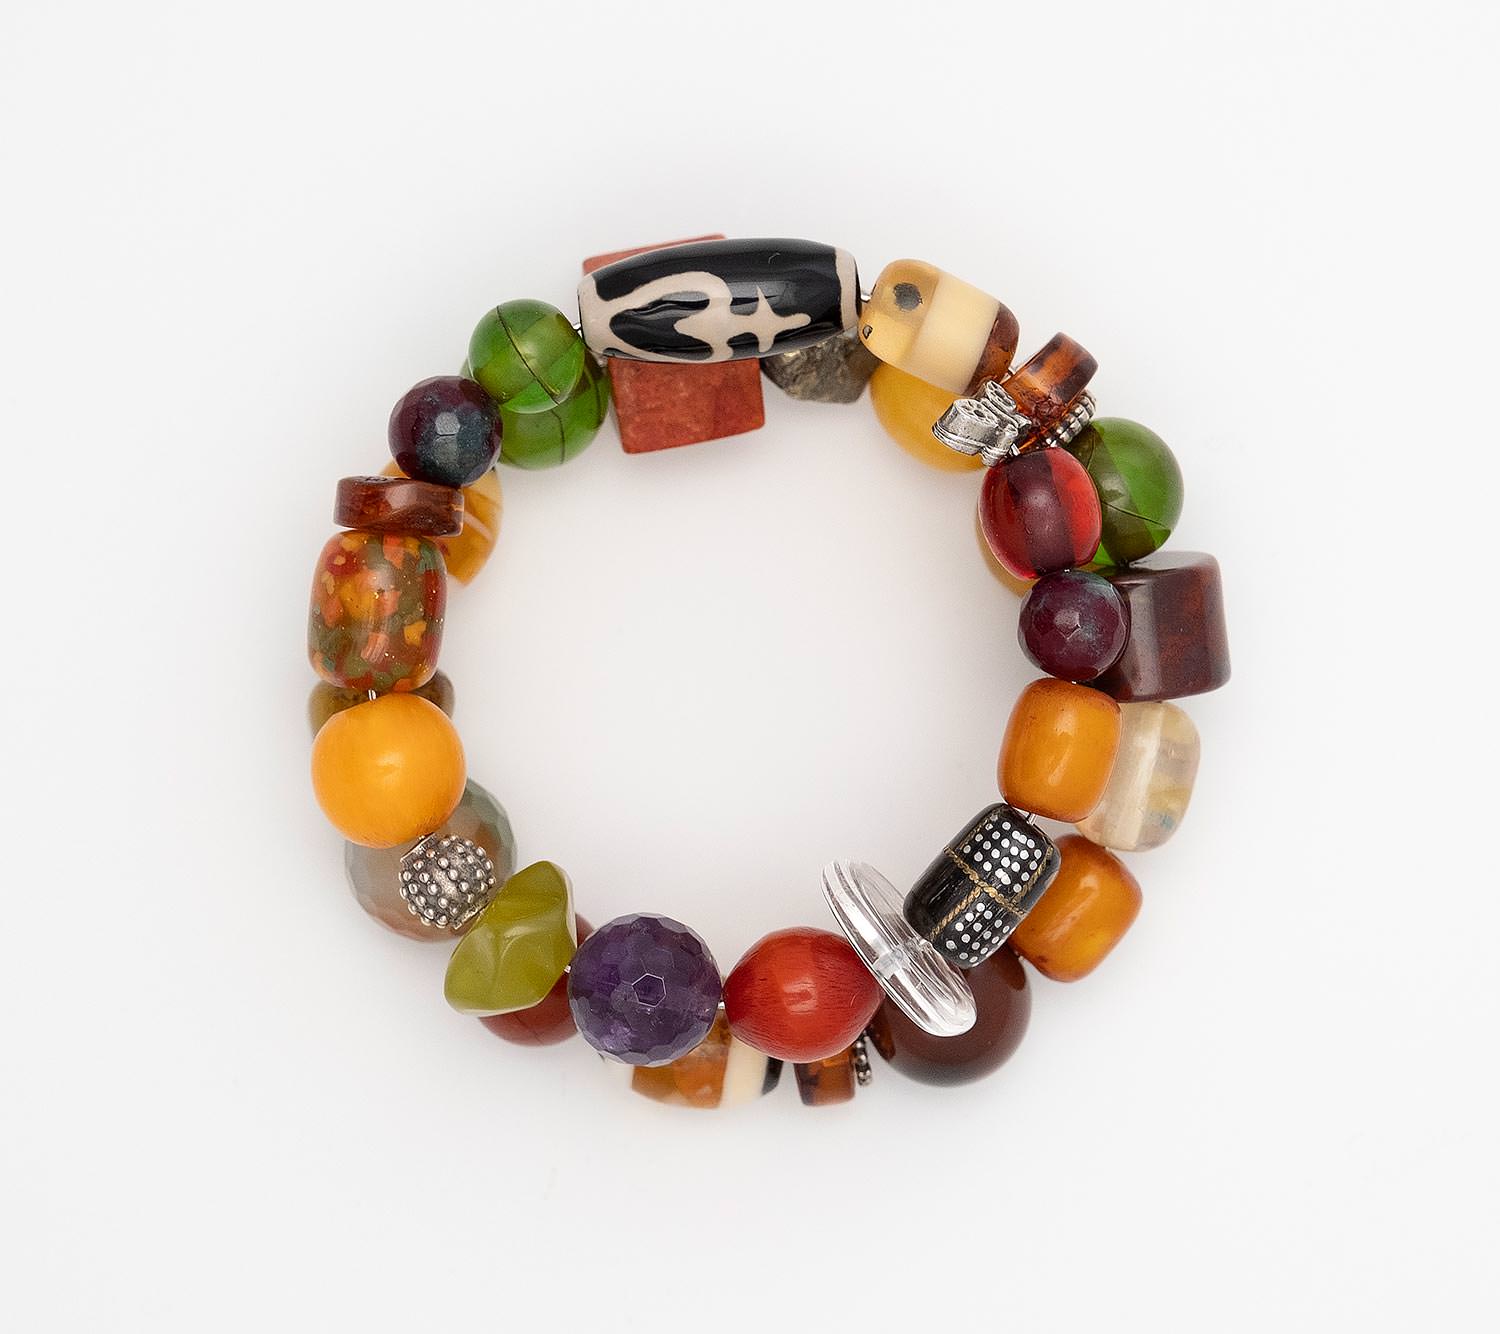 Bracelet with beads made of old mixture of artificial resins of Egypt (1960), Baltic Sea Amber (cut by hand), Water buffalo Horn with inlaid silver and bronze, Agates and tin
